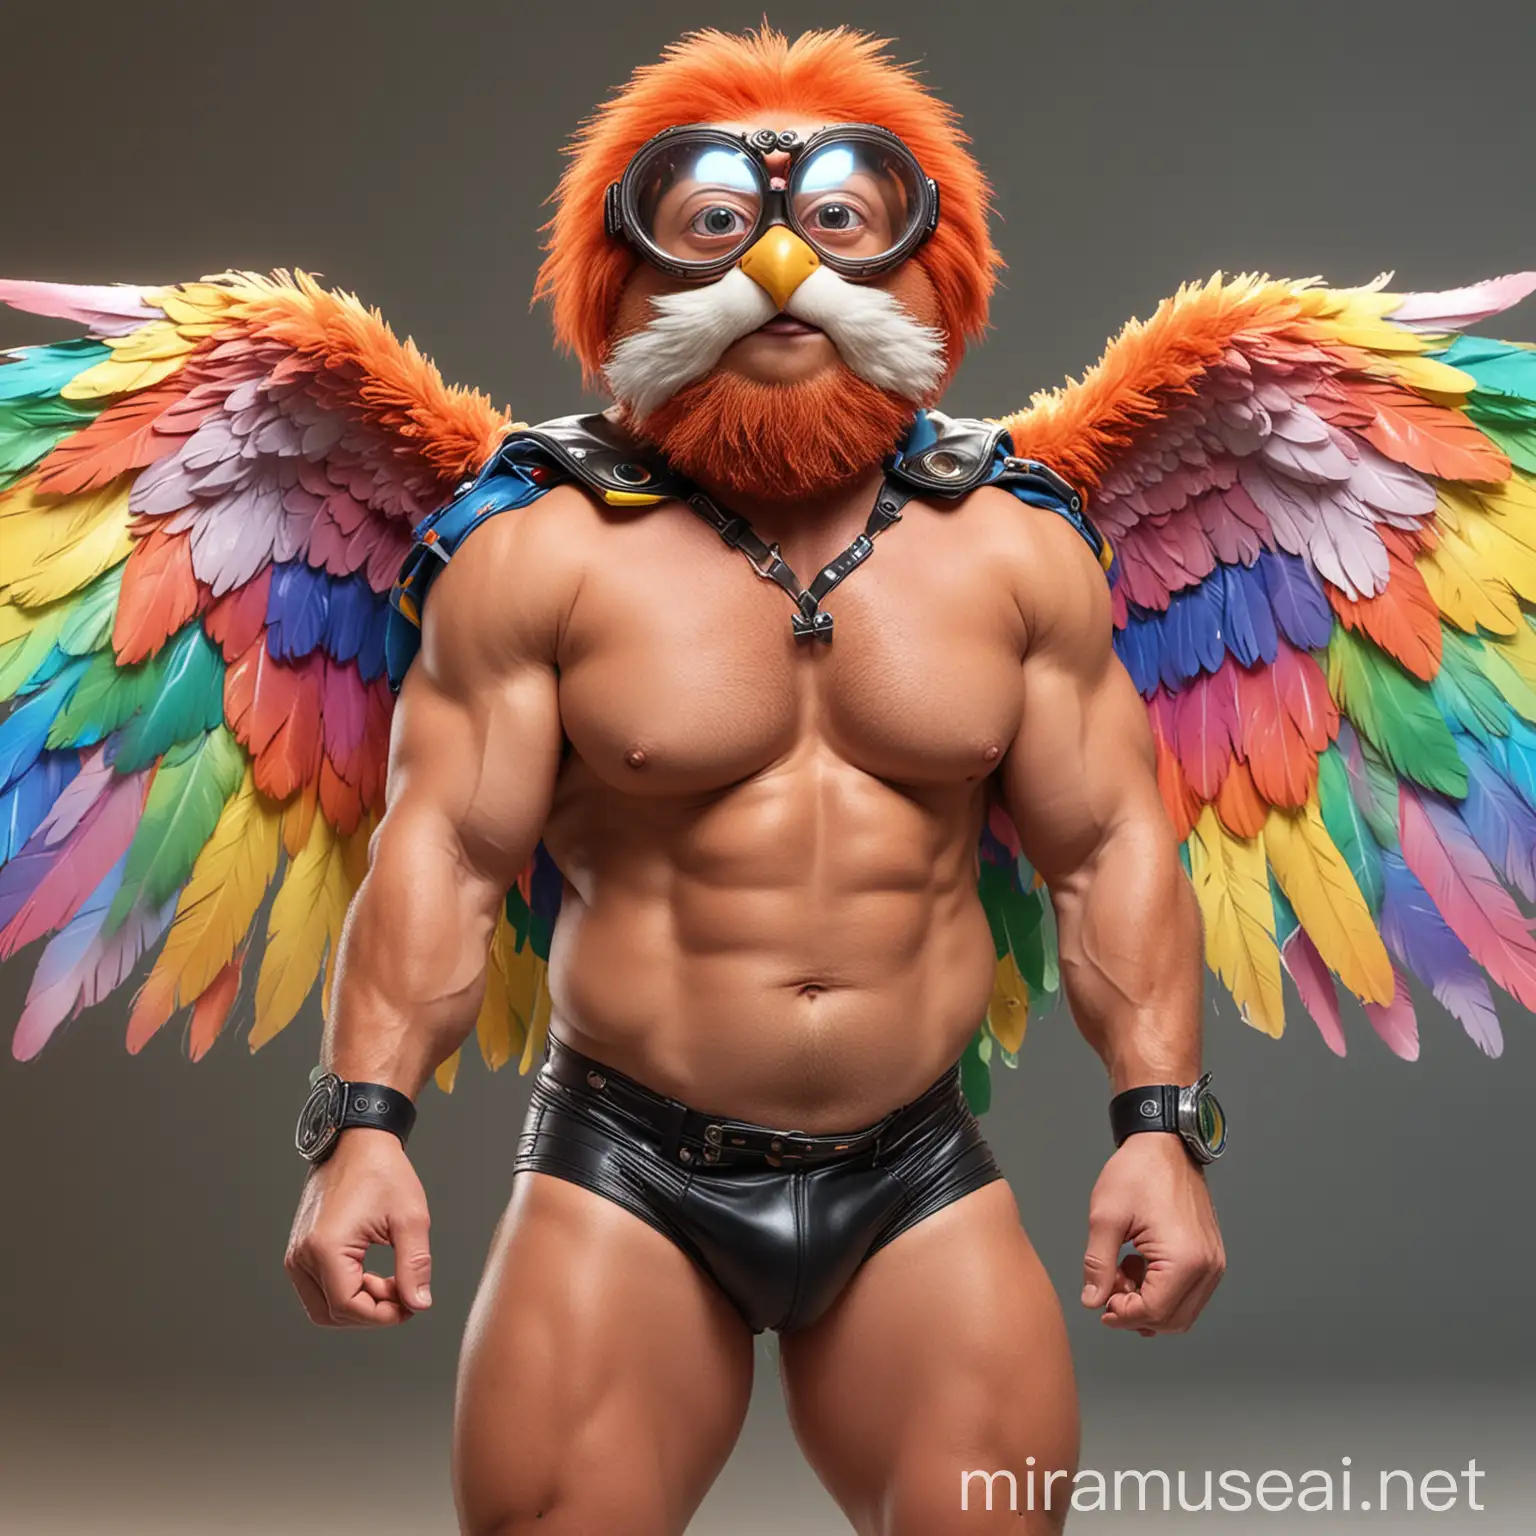 Topless 40s Ultra beefy Red Head Bodybuilder Daddy Big Eyes with Beard Wearing Multi-Highlighter Bright Rainbow Colored See Through huge Eagle Wings Shoulder Jacket short shorts low leather boots and Flexing his Big Strong Arm with Doraemon Goggles